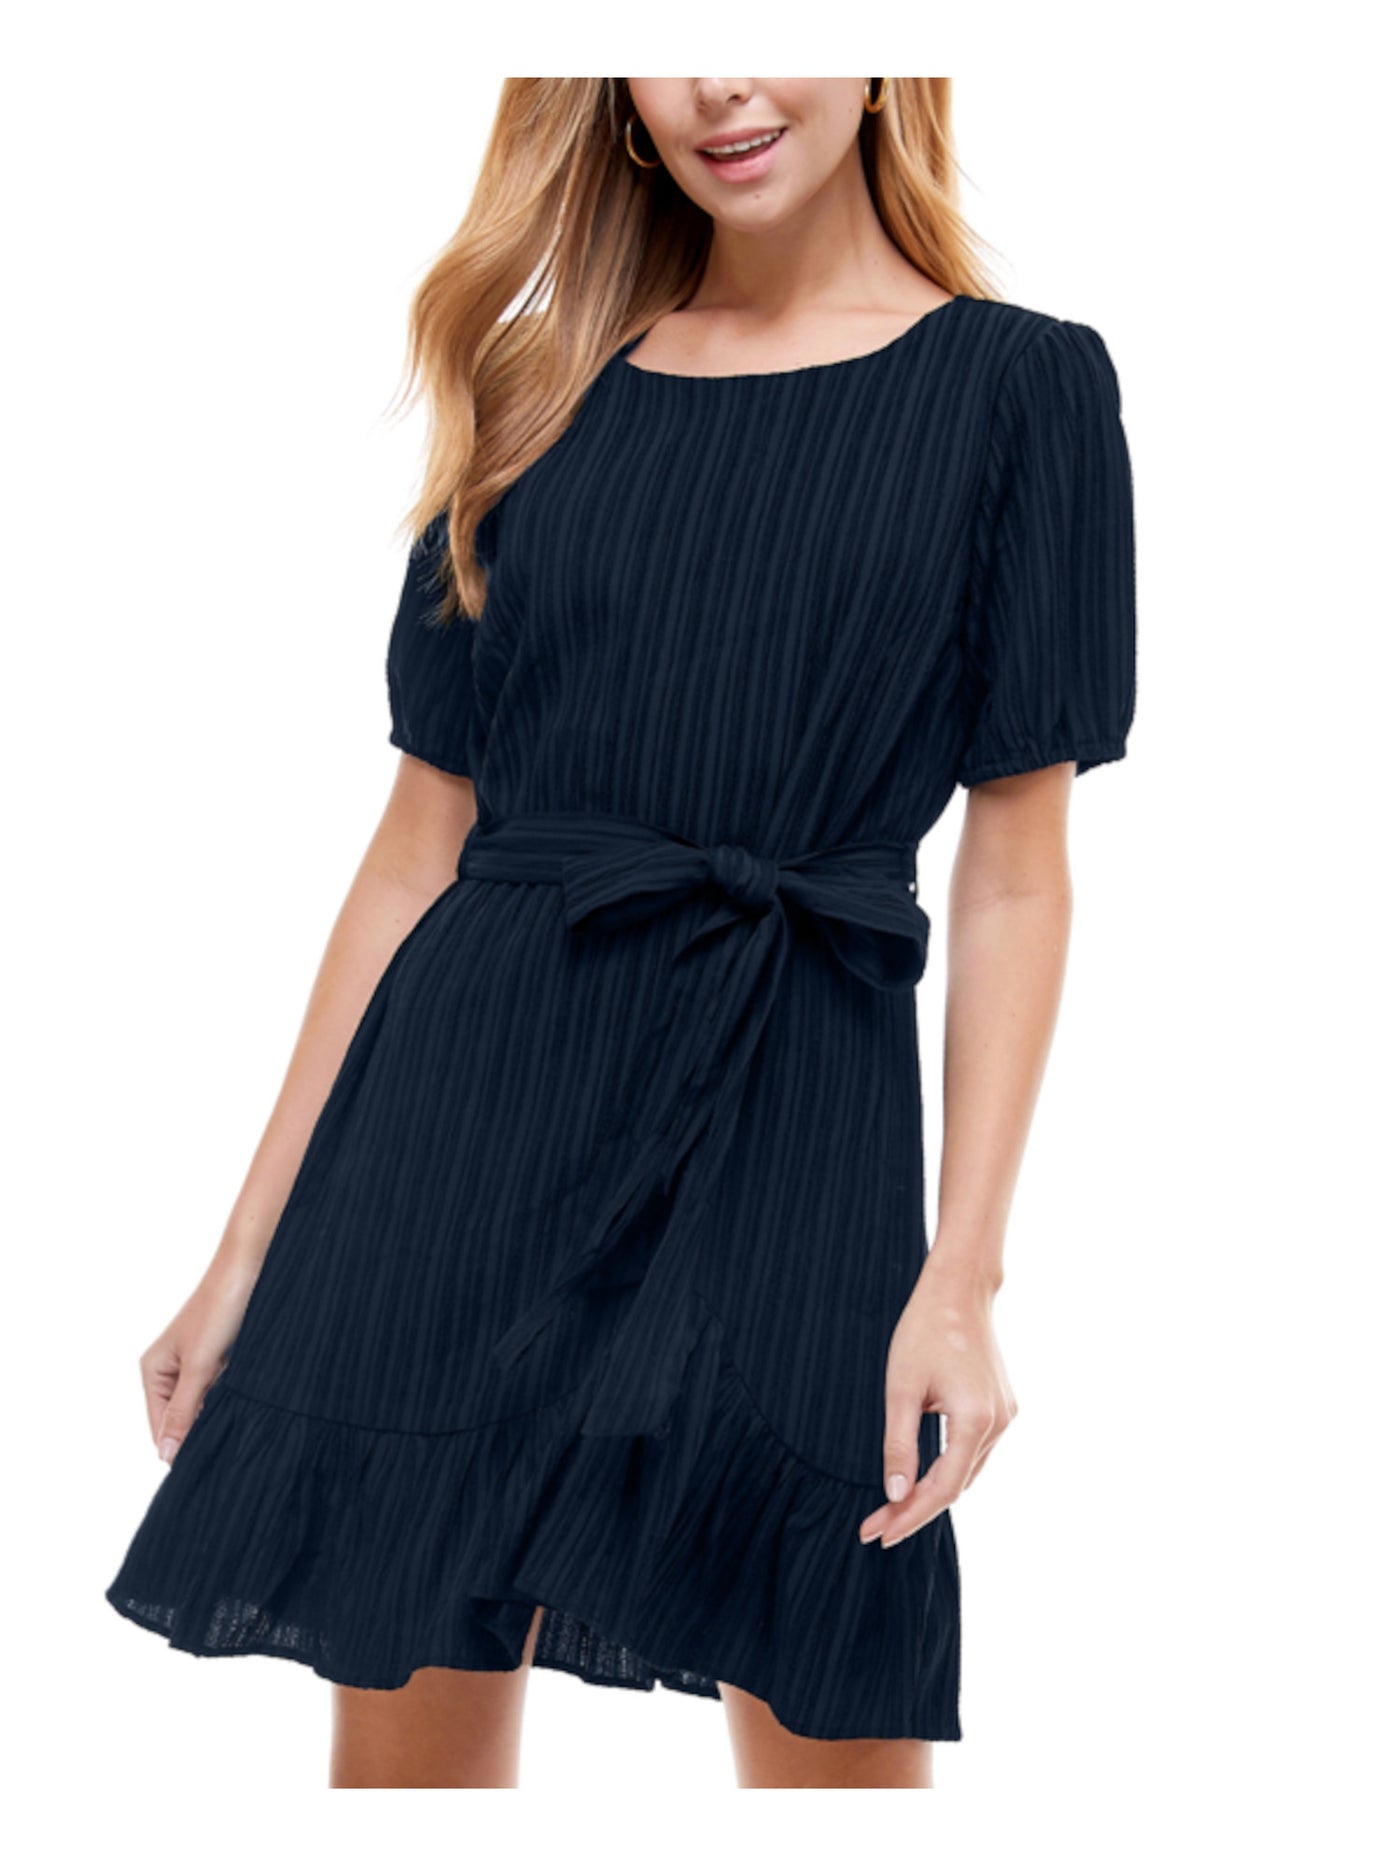 CITY STUDIO Womens Navy Stretch Textured Ruffled Keyhole Back Belted Short Sleeve Jewel Neck Short Party Fit + Flare Dress Juniors XL